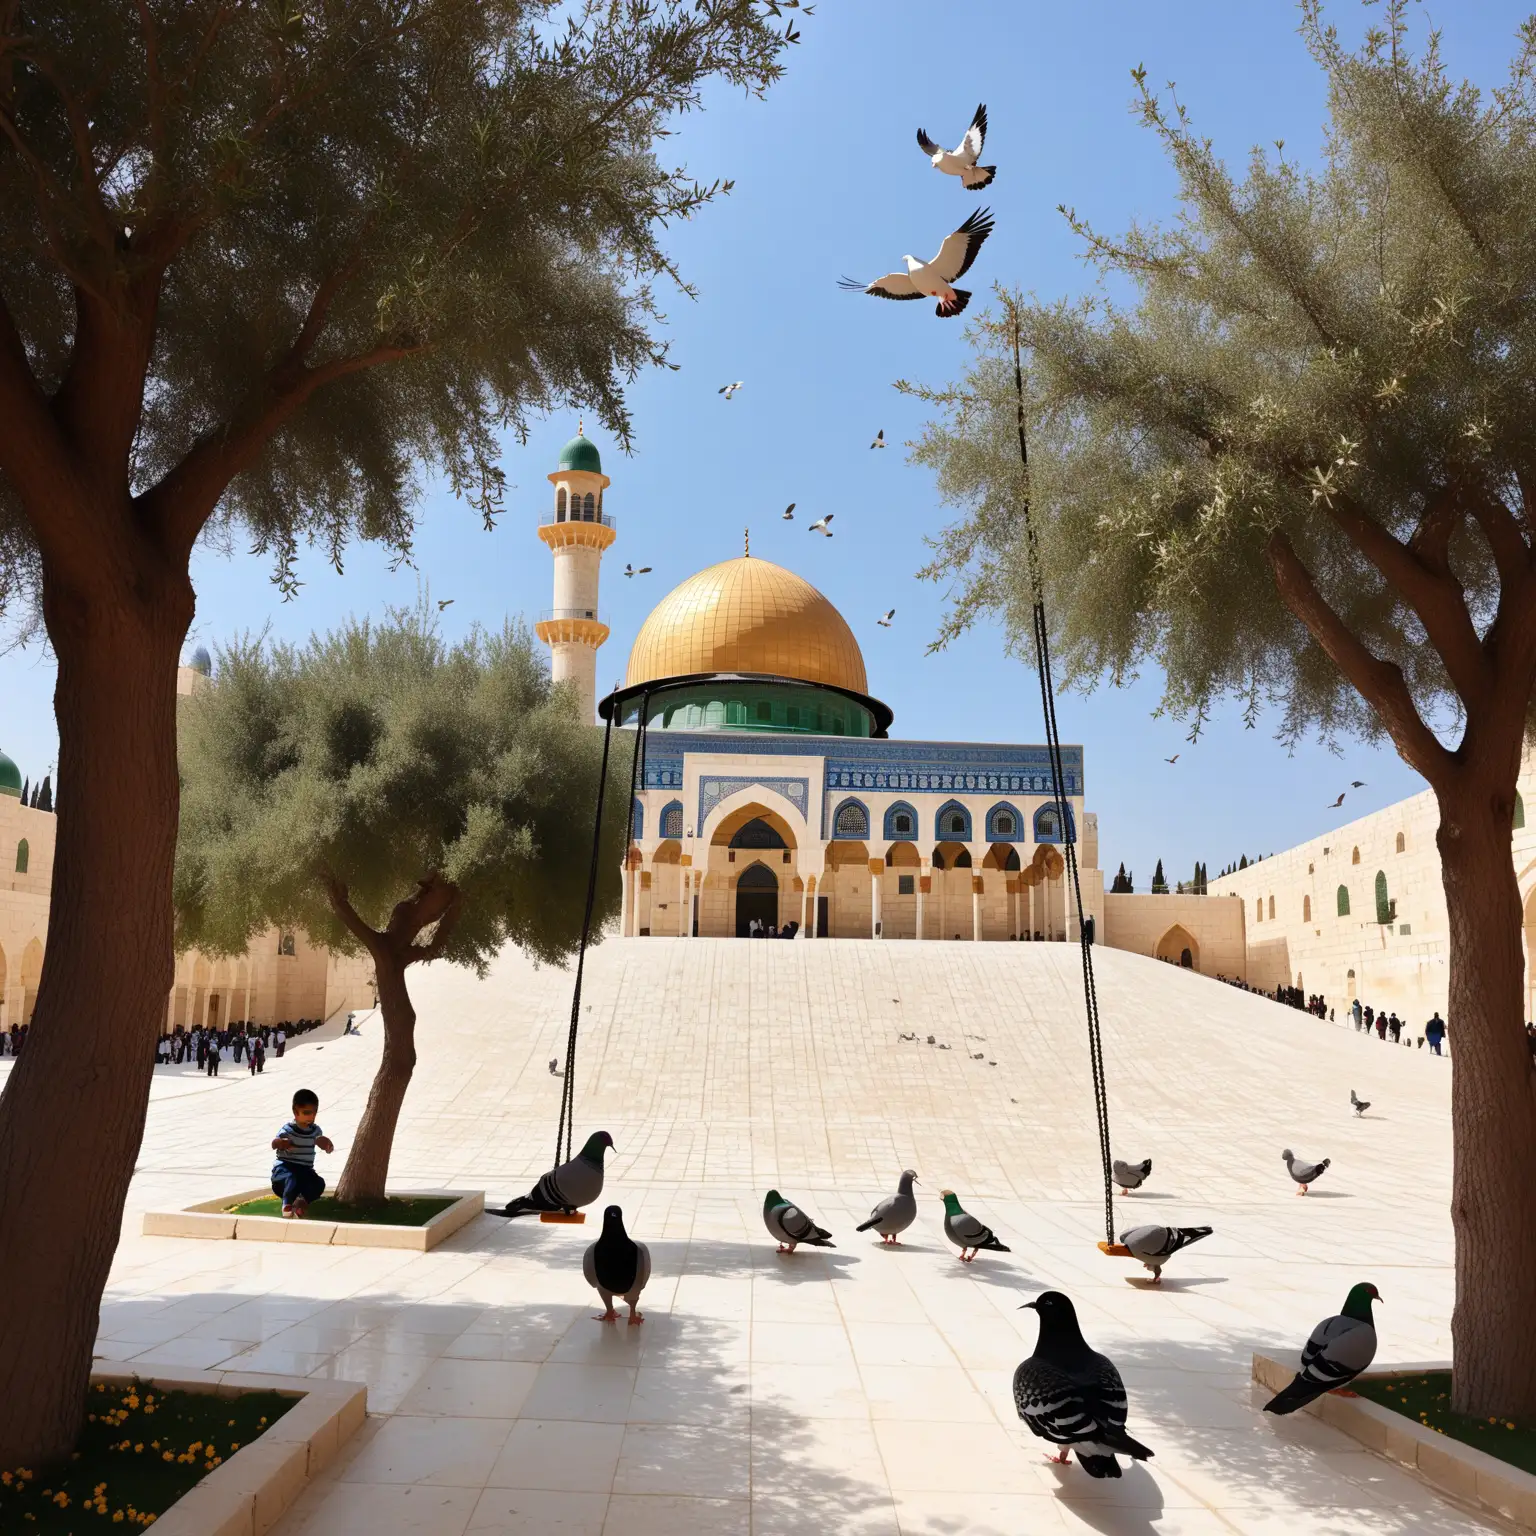 Joyful Children Playing at AlAqsa Mosque with Pigeons and Olive Trees